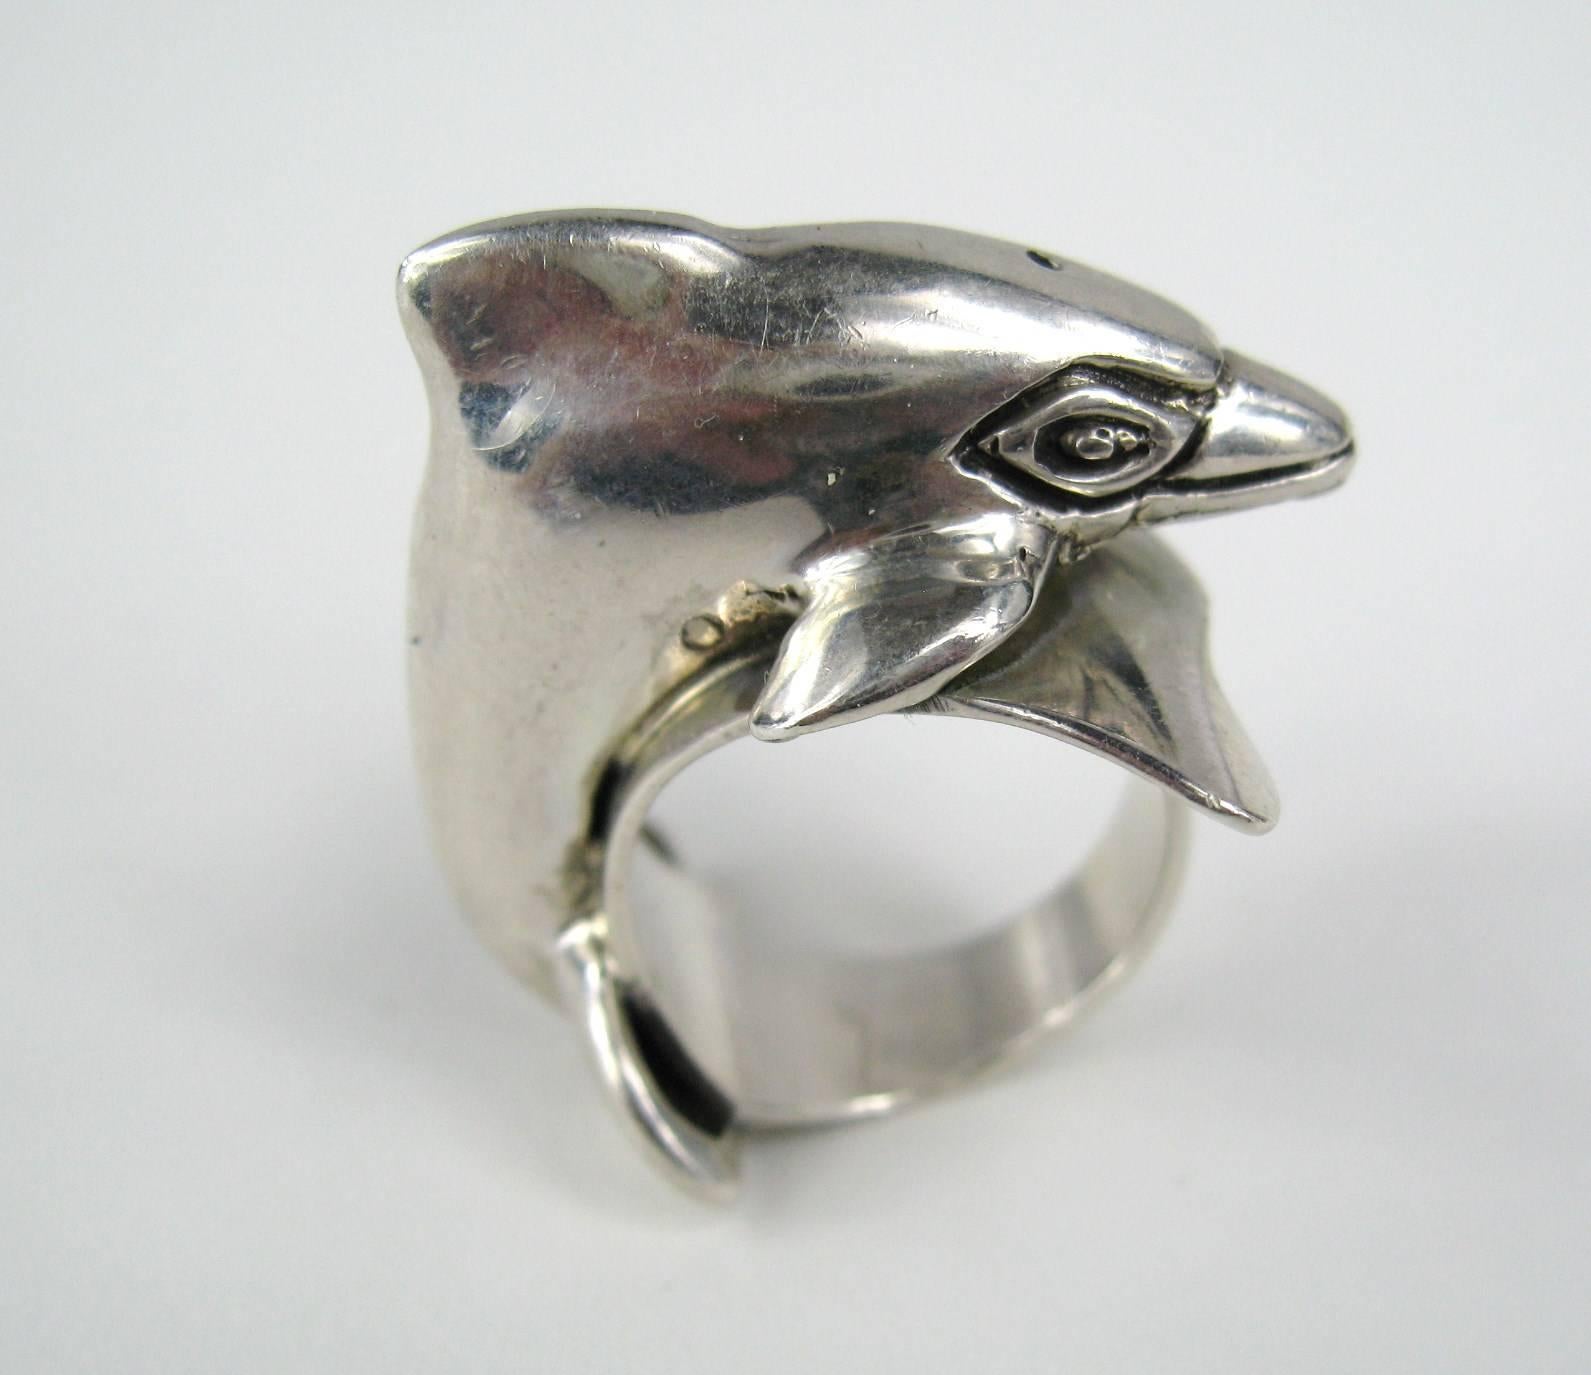 A Large Carol Felley Dolphin Ring in Sterling Silver. This is a Wide as well as a High Ring. Hallmarked and dated 1988 inside the shank of the ring measuring 1 inch top to bottom Ring and about .60in High.  size 7. This is out of a massive